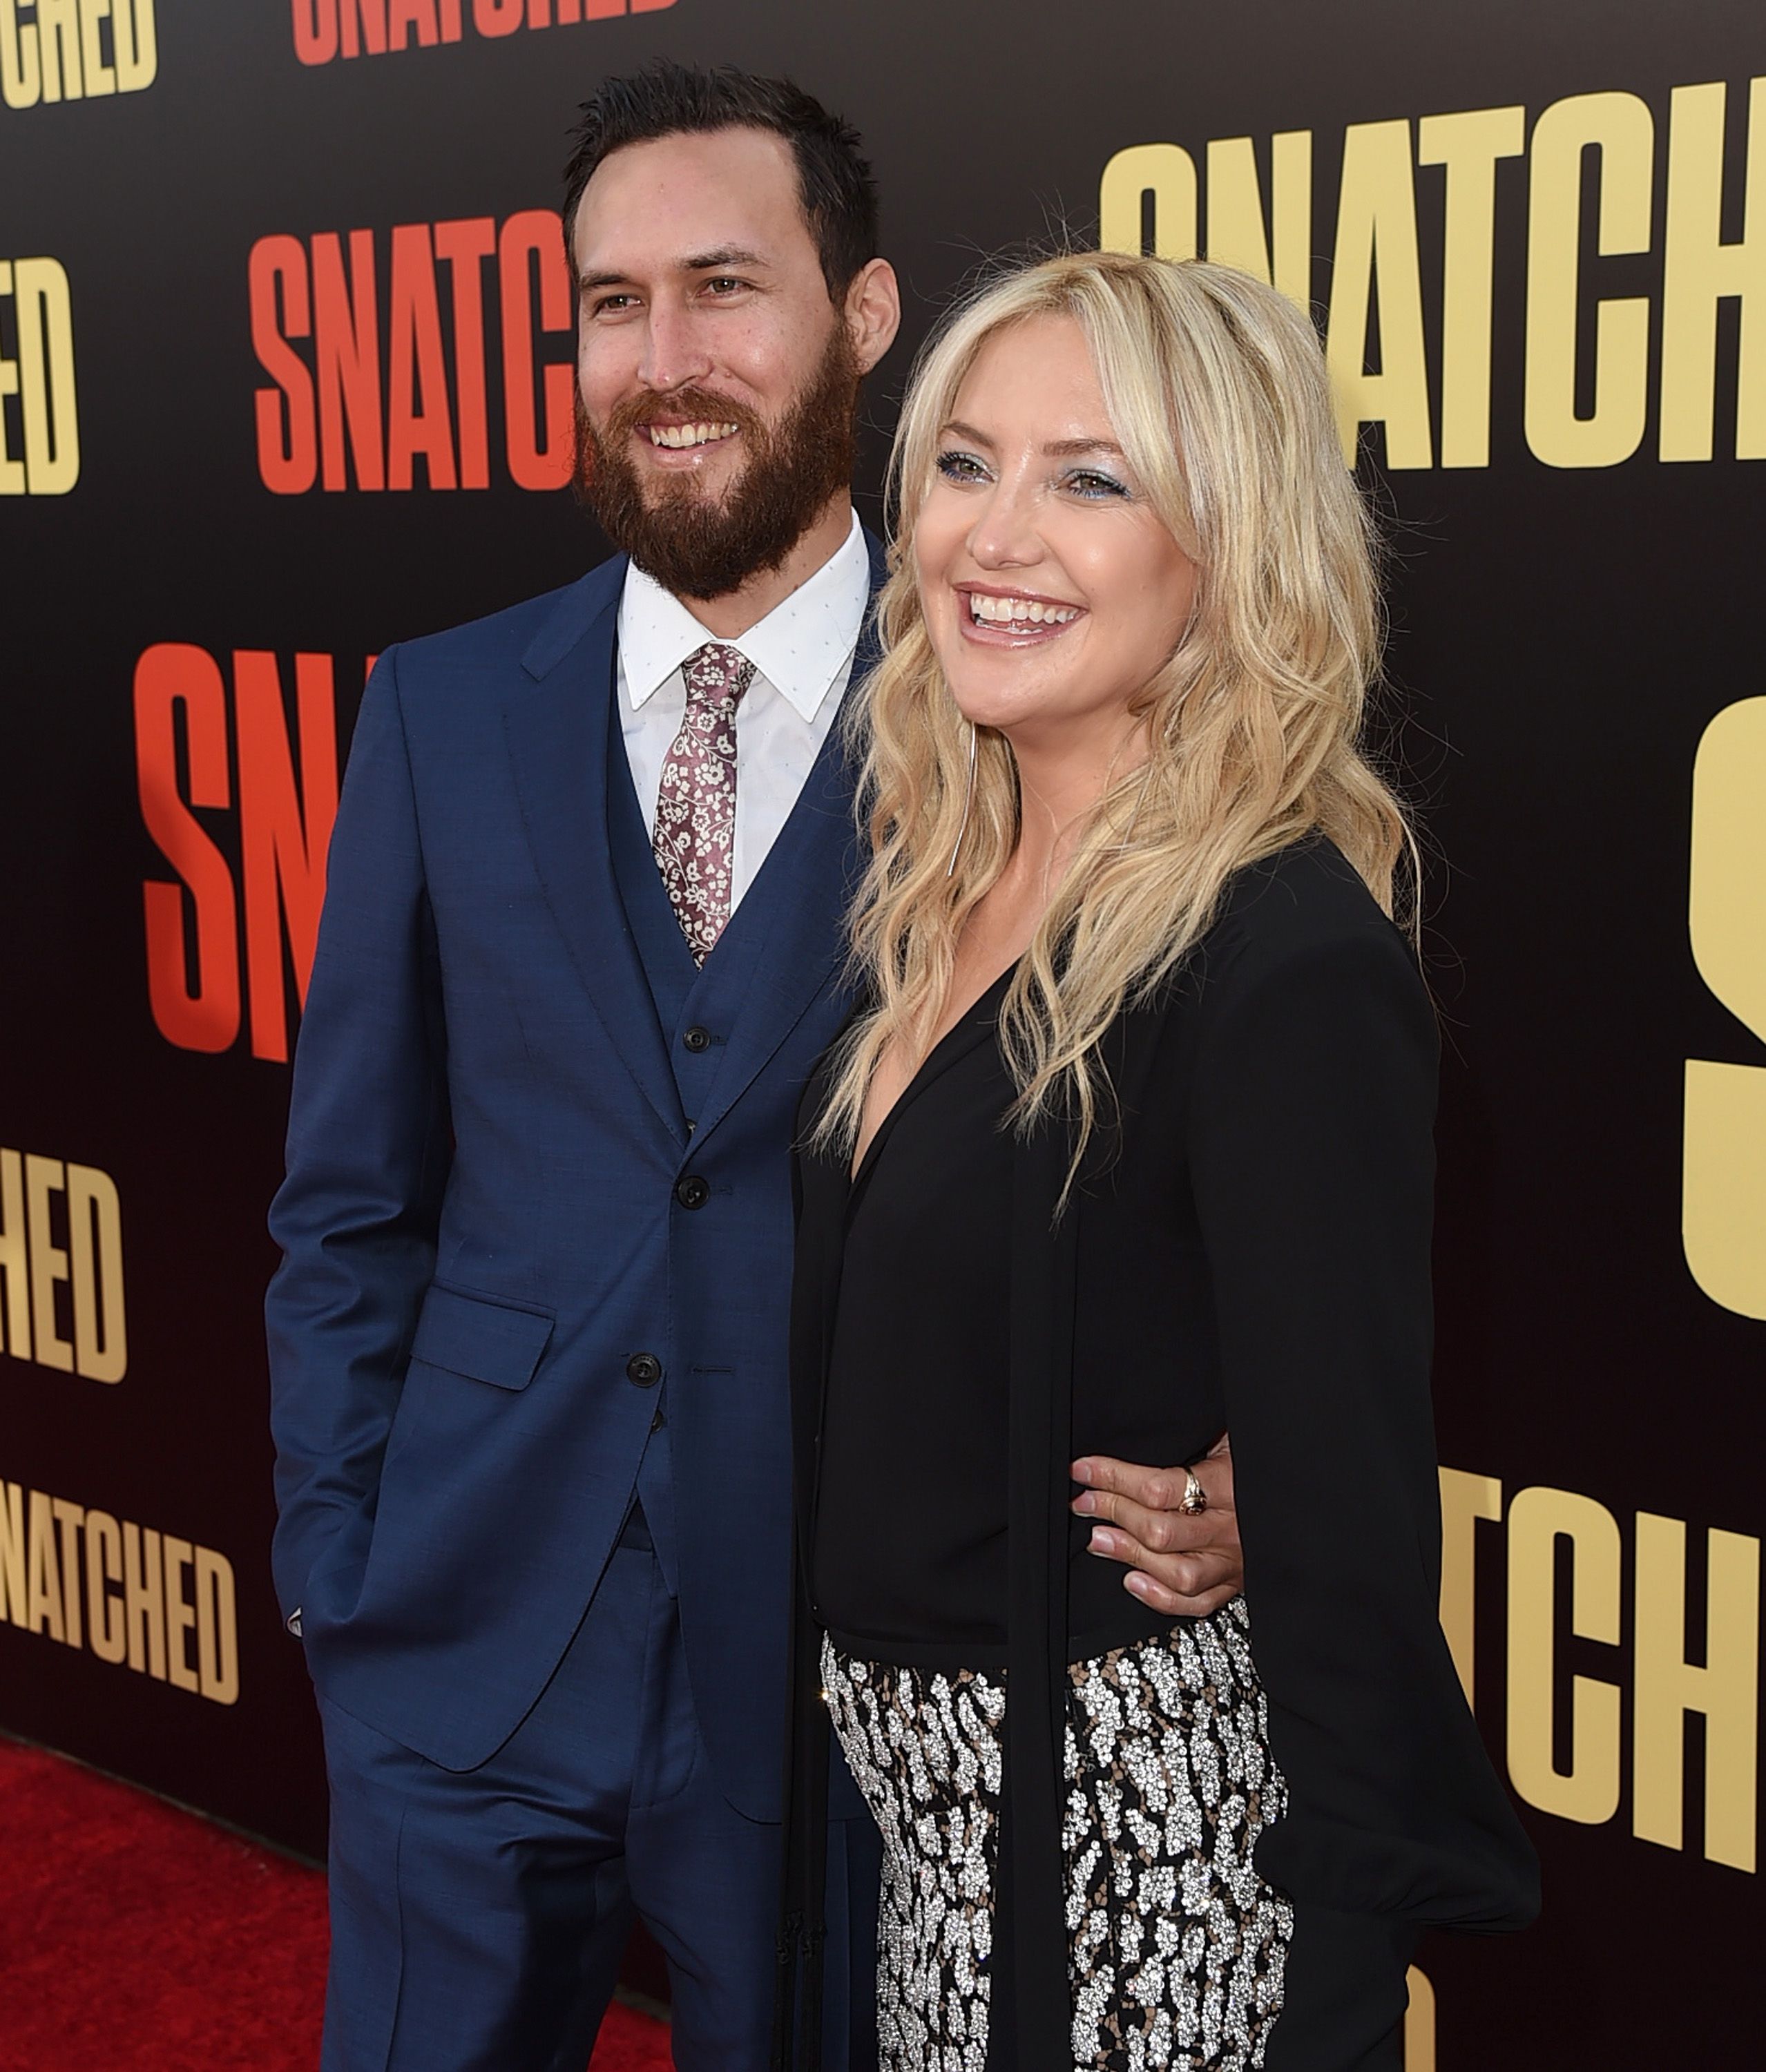 Danny Fujikawa and Kate Hudson at the premiere of "Snatched" at Regency Village Theatre on May 10, 2017, in Westwood, California | Photo: Kevin Winter/Getty Images